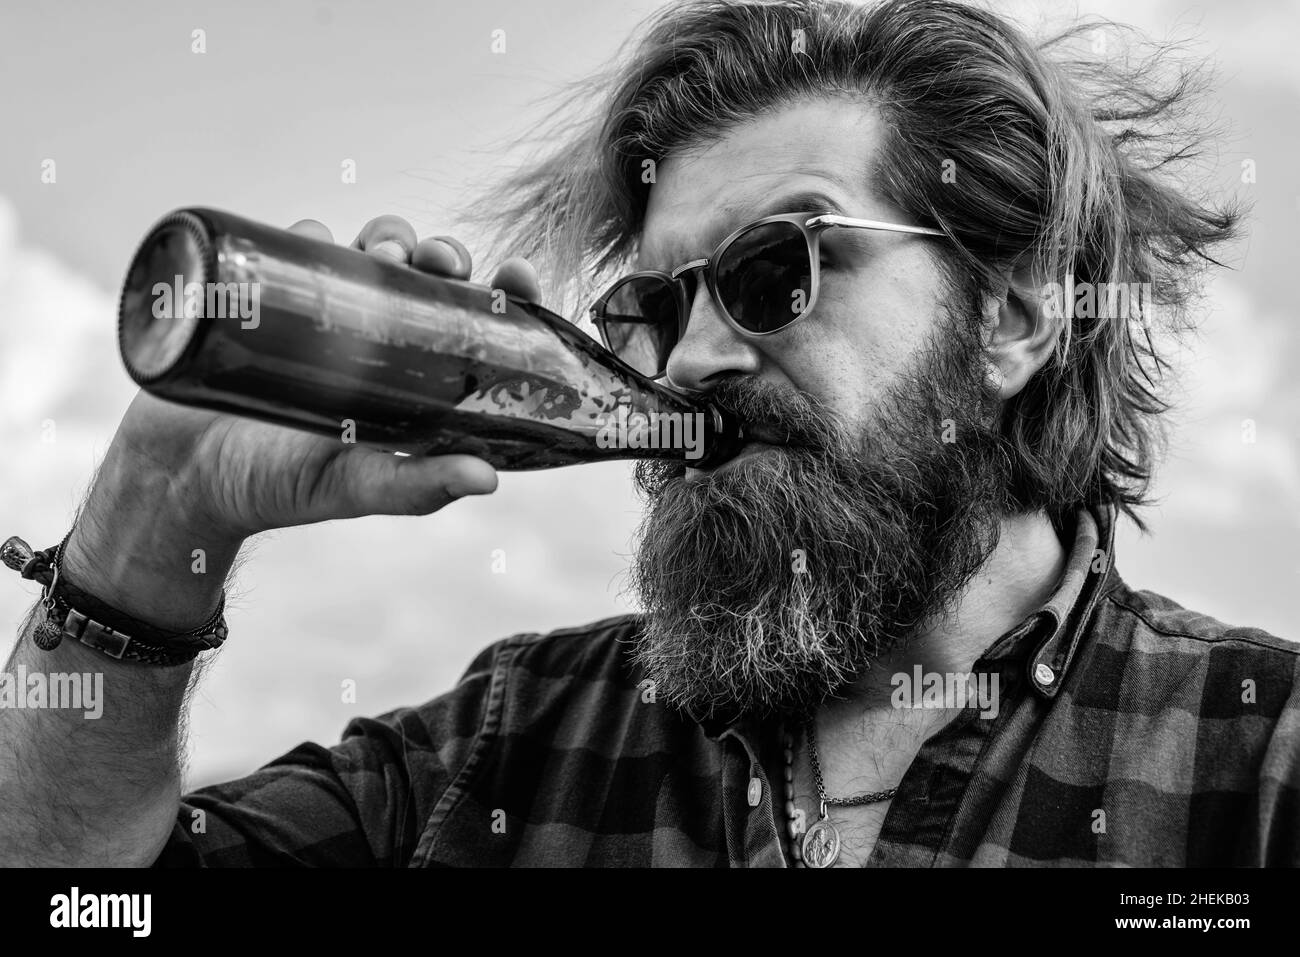 feeling thirsty. mature charismatic male drink beer from bottle. guy with beard and moustache outdoor. drinking beer from glass bottle. bearded man Stock Photo